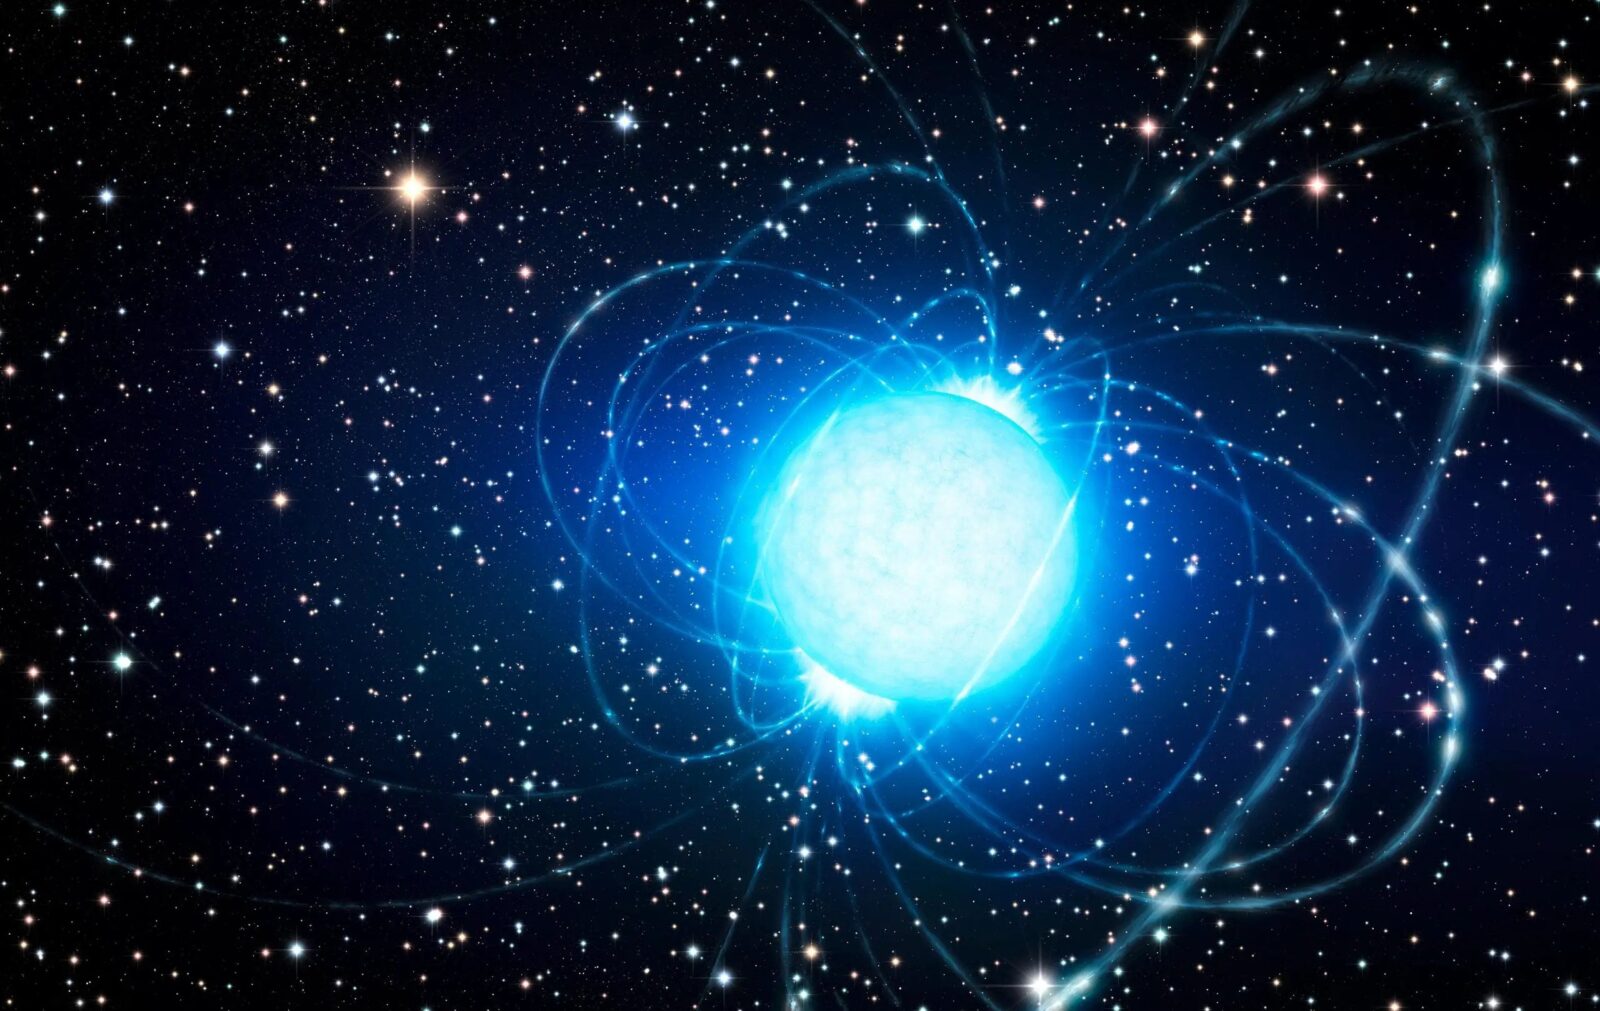 They measured the mass of several nuclides.  Thanks to this, they discovered the secrets of the neutron star